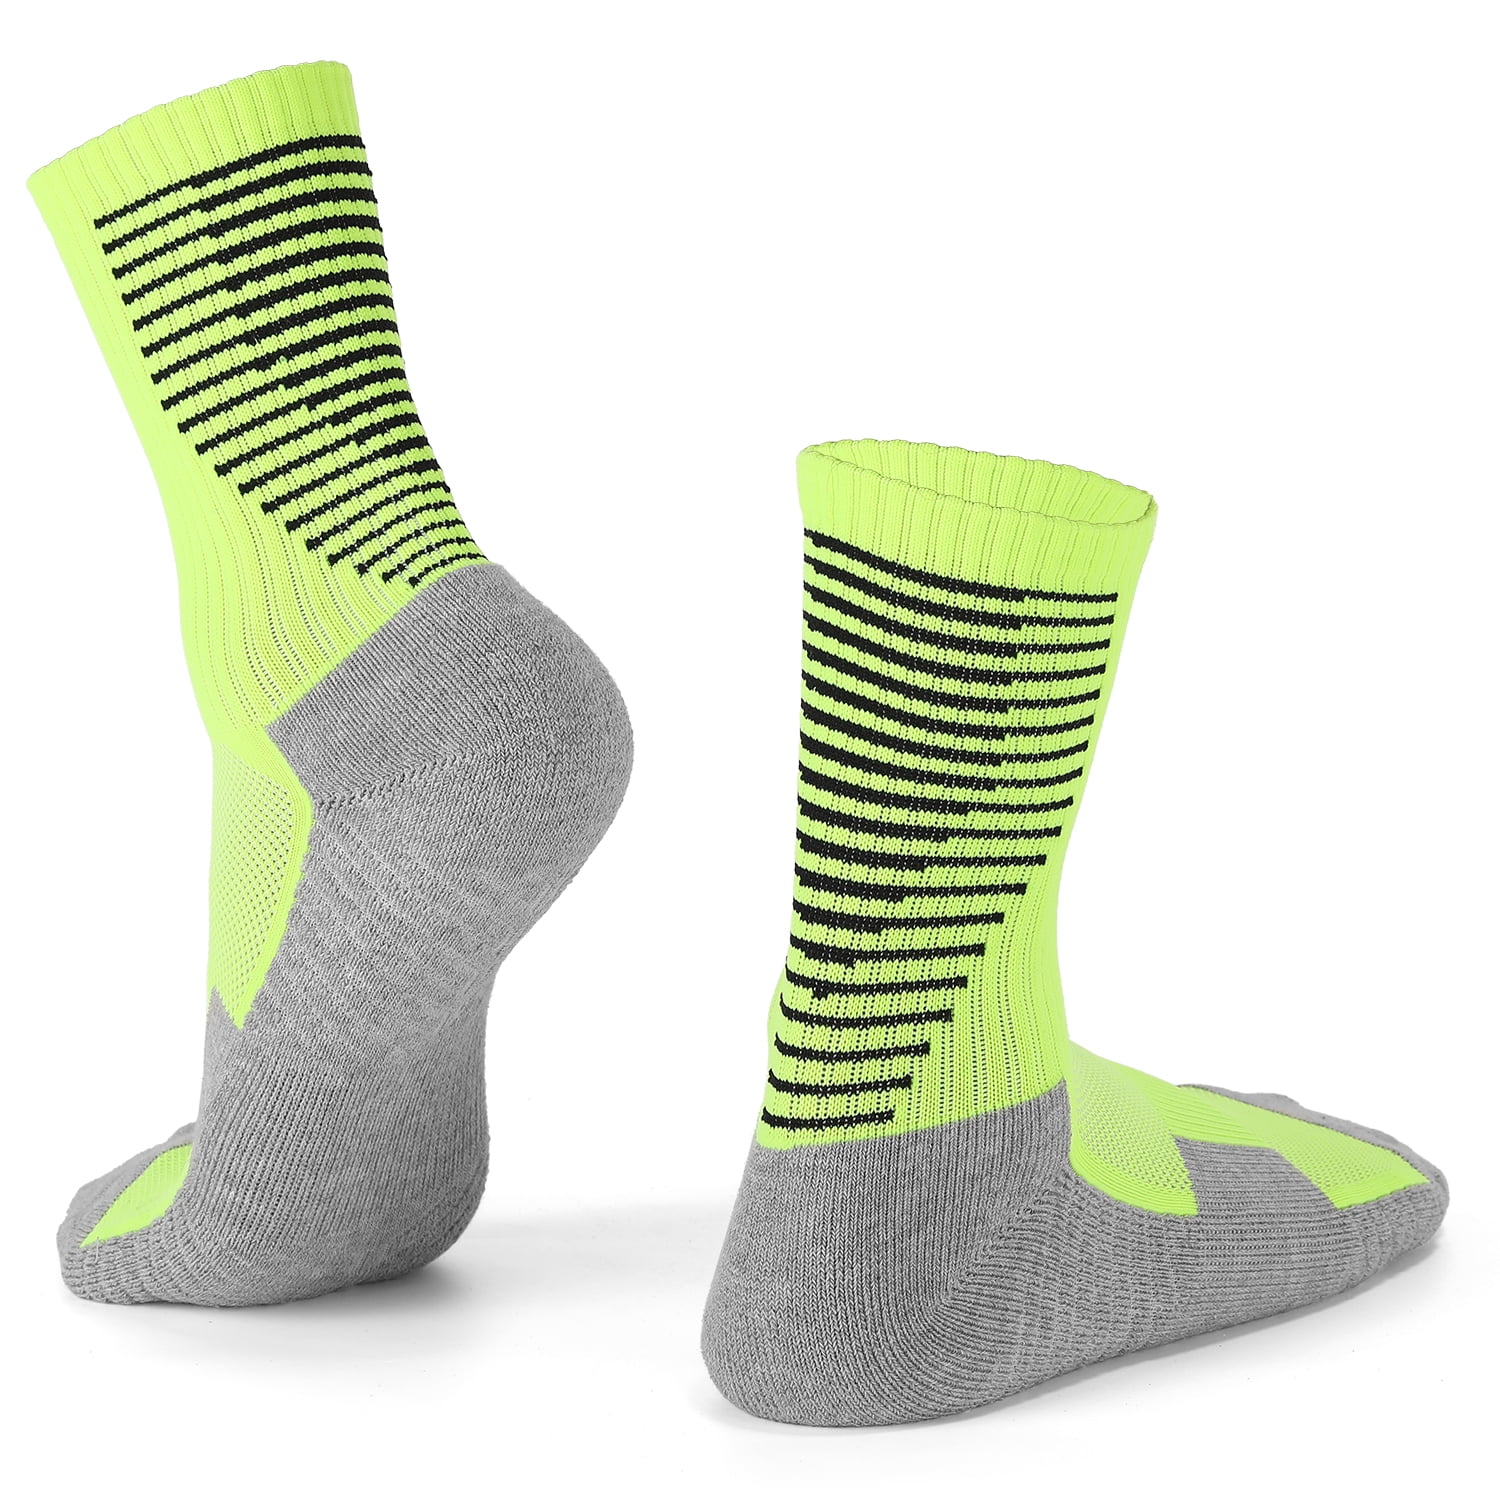 Details about   Soccer Socks Team Sports Socks Outdoor Fitness Breathable Quick Dry Socks B8S0 